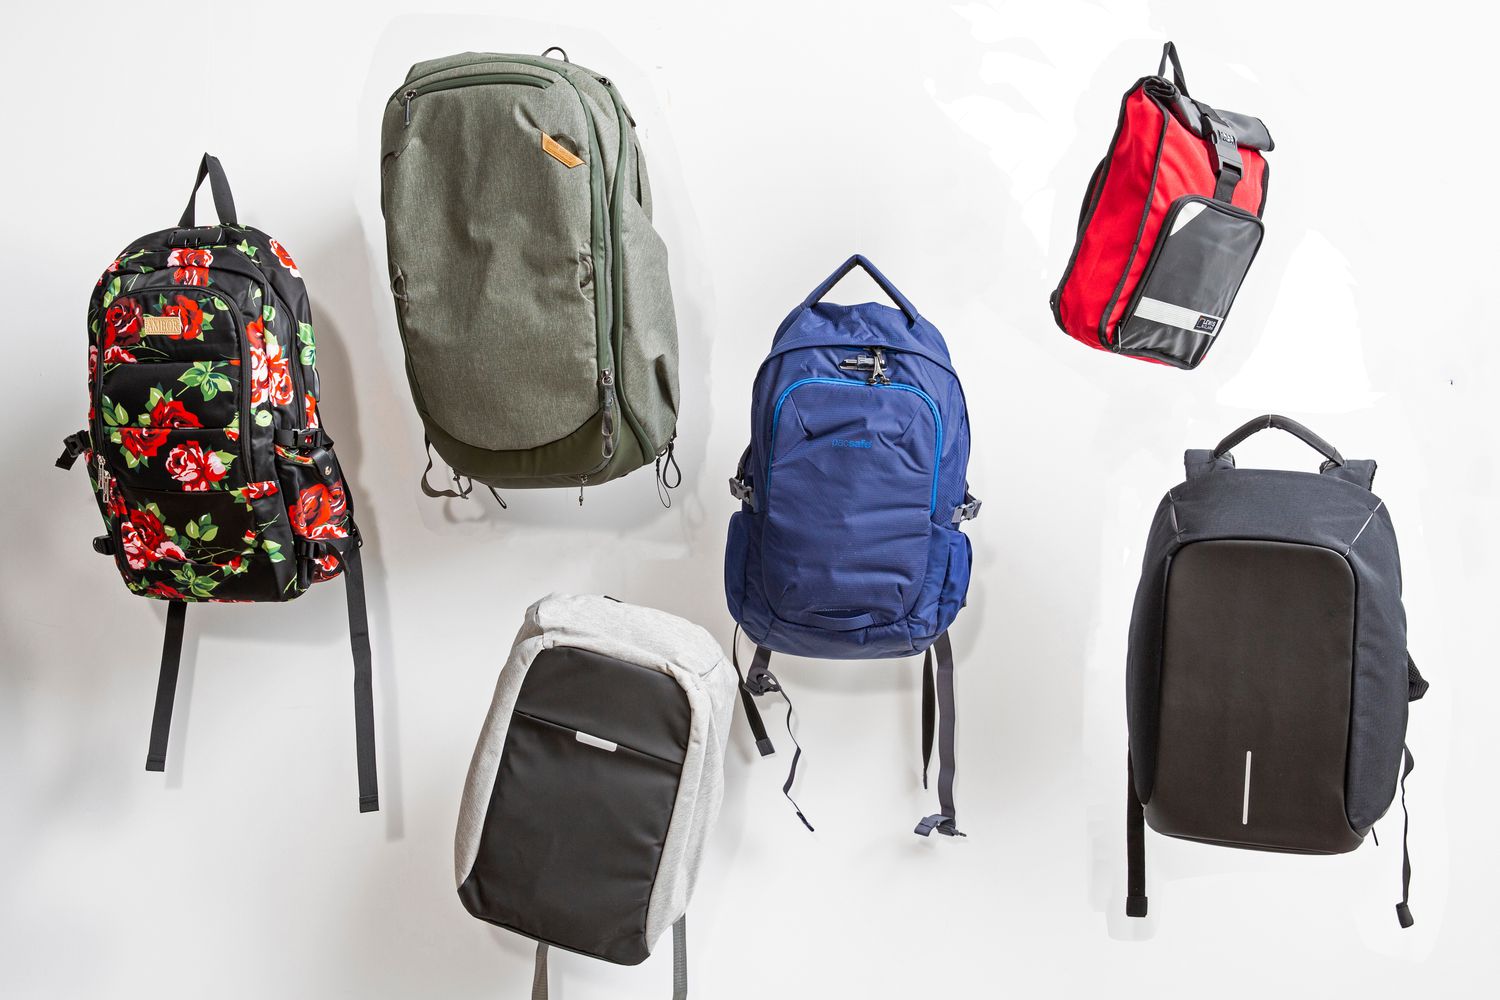 Product Review: The Best Lightweight Backpacks for Travel